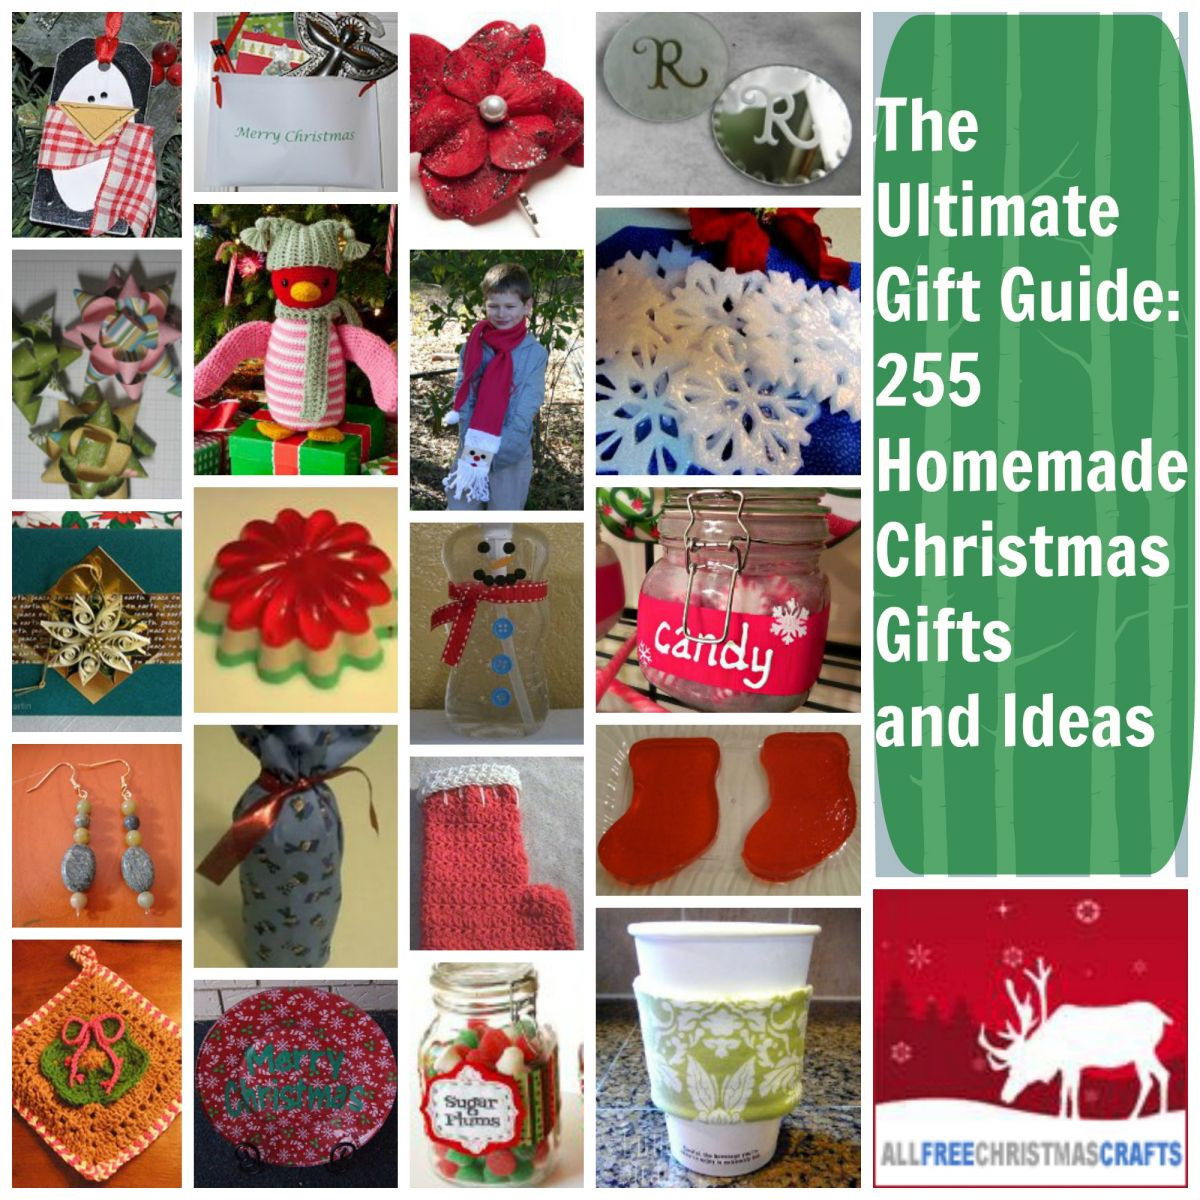 Free Christmas Gift Ideas
 The Ultimate Gift Guide 255 Homemade Christmas Gifts and